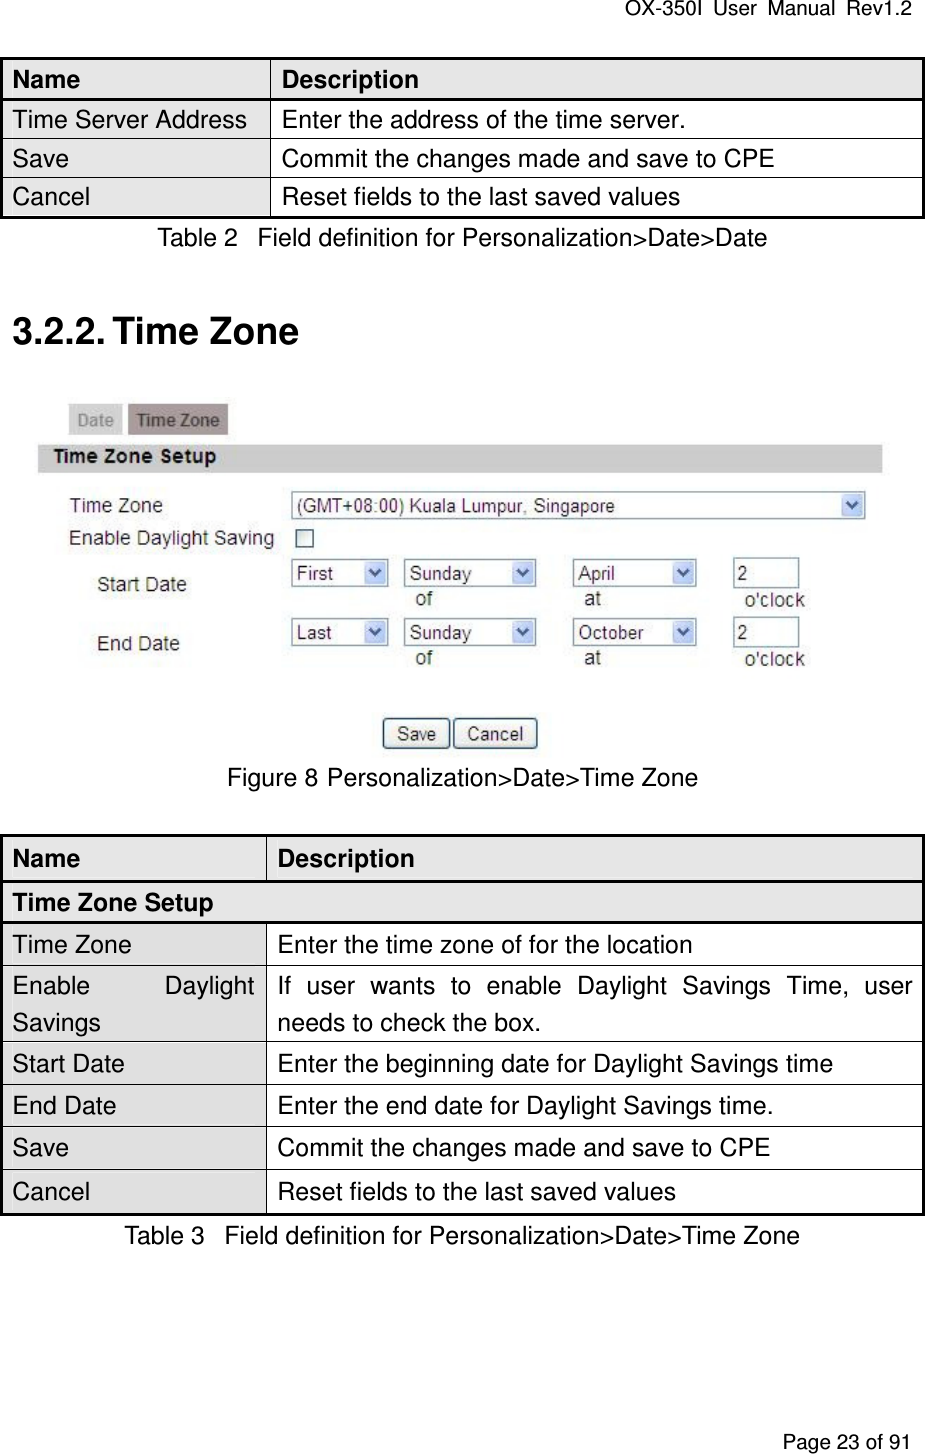 OX-350I  User  Manual  Rev1.2 Page 23 of 91 Name  Description Time Server Address  Enter the address of the time server. Save  Commit the changes made and save to CPE Cancel    Reset fields to the last saved values Table 2  Field definition for Personalization&gt;Date&gt;Date 3.2.2. Time Zone  Figure 8 Personalization&gt;Date&gt;Time Zone Name  Description Time Zone Setup Time Zone  Enter the time zone of for the location Enable  Daylight Savings If  user  wants  to  enable  Daylight  Savings  Time,  user needs to check the box. Start Date  Enter the beginning date for Daylight Savings time End Date  Enter the end date for Daylight Savings time. Save  Commit the changes made and save to CPE Cancel  Reset fields to the last saved values Table 3  Field definition for Personalization&gt;Date&gt;Time Zone 